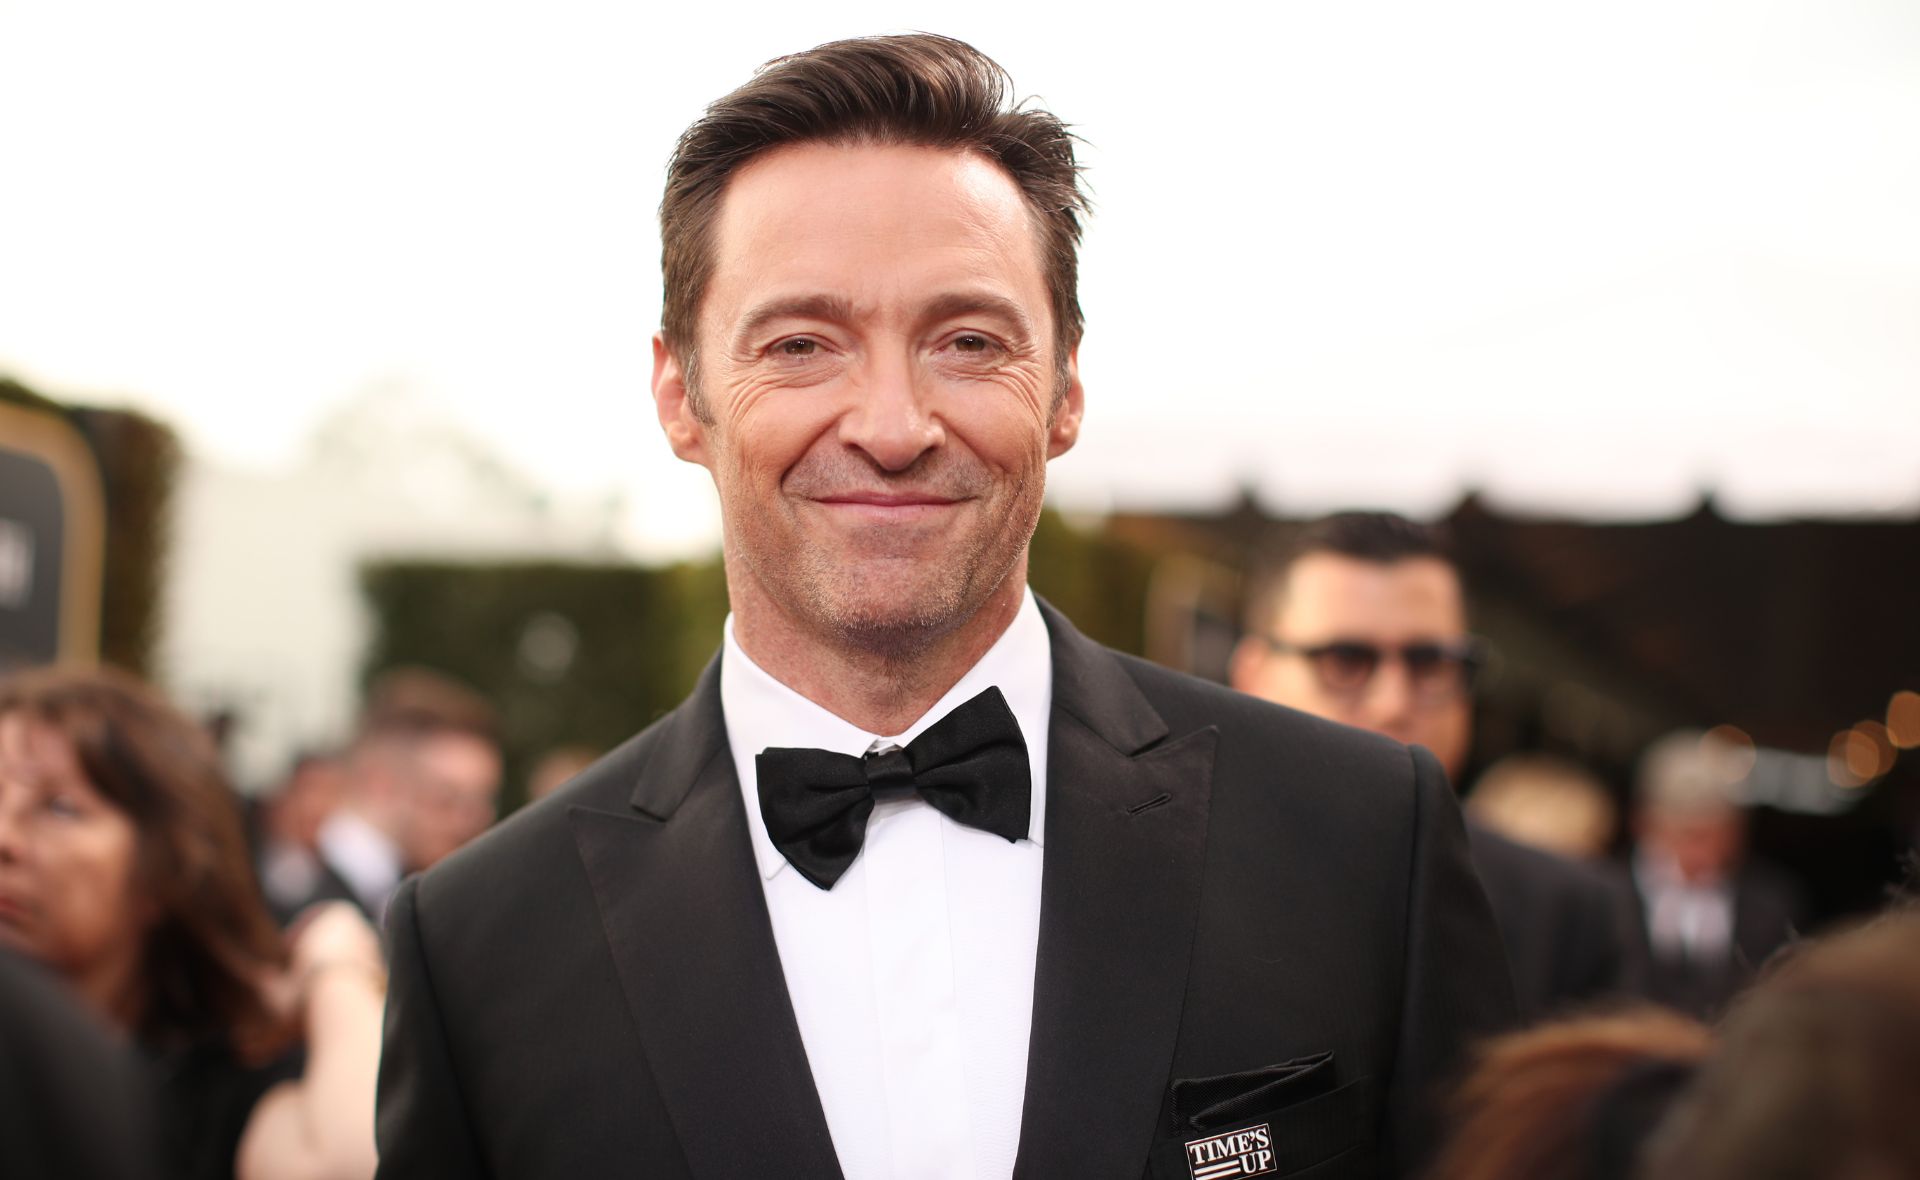 “I wanted you guys to hear it from me first”: Hugh Jackman shares emotional health update